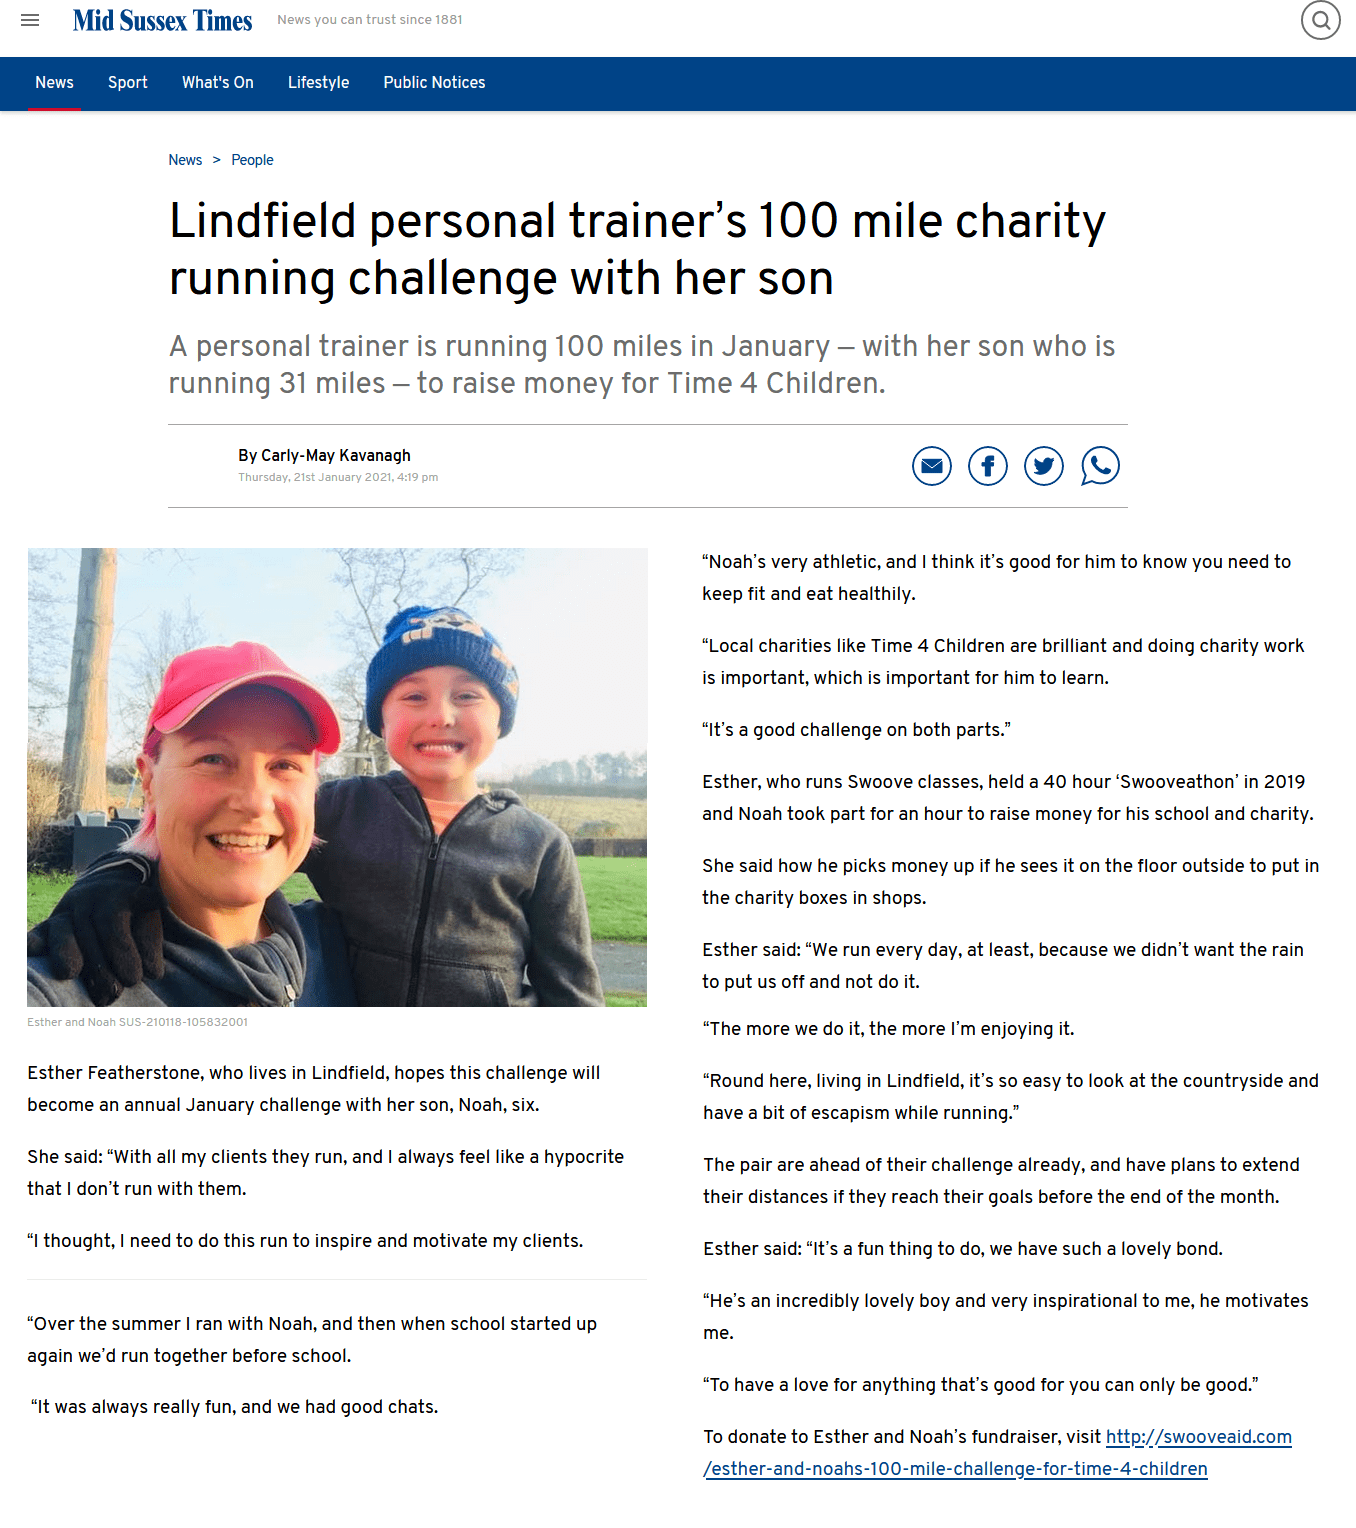 esther-and-noah-100-mile-challenge